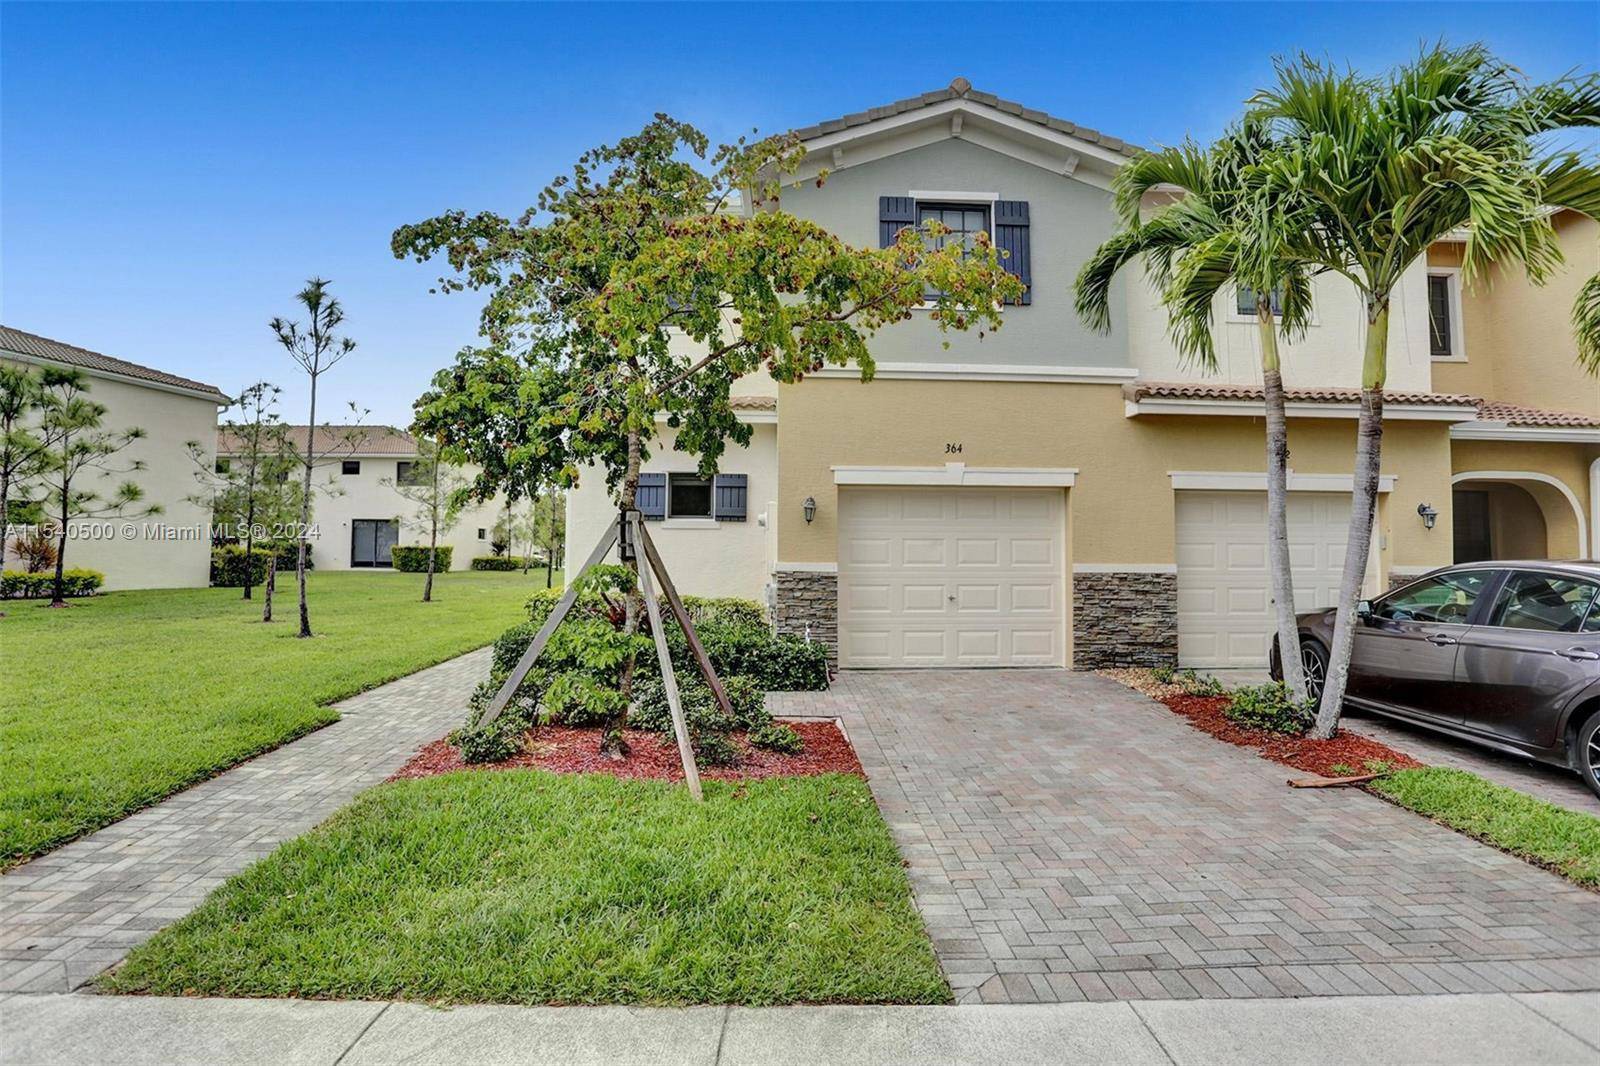 Beautiful 3 bed 2. 5 bath corner townhome in Aventura Isles, upgraded white kitchen with granite countertops and stainless steel appliances.